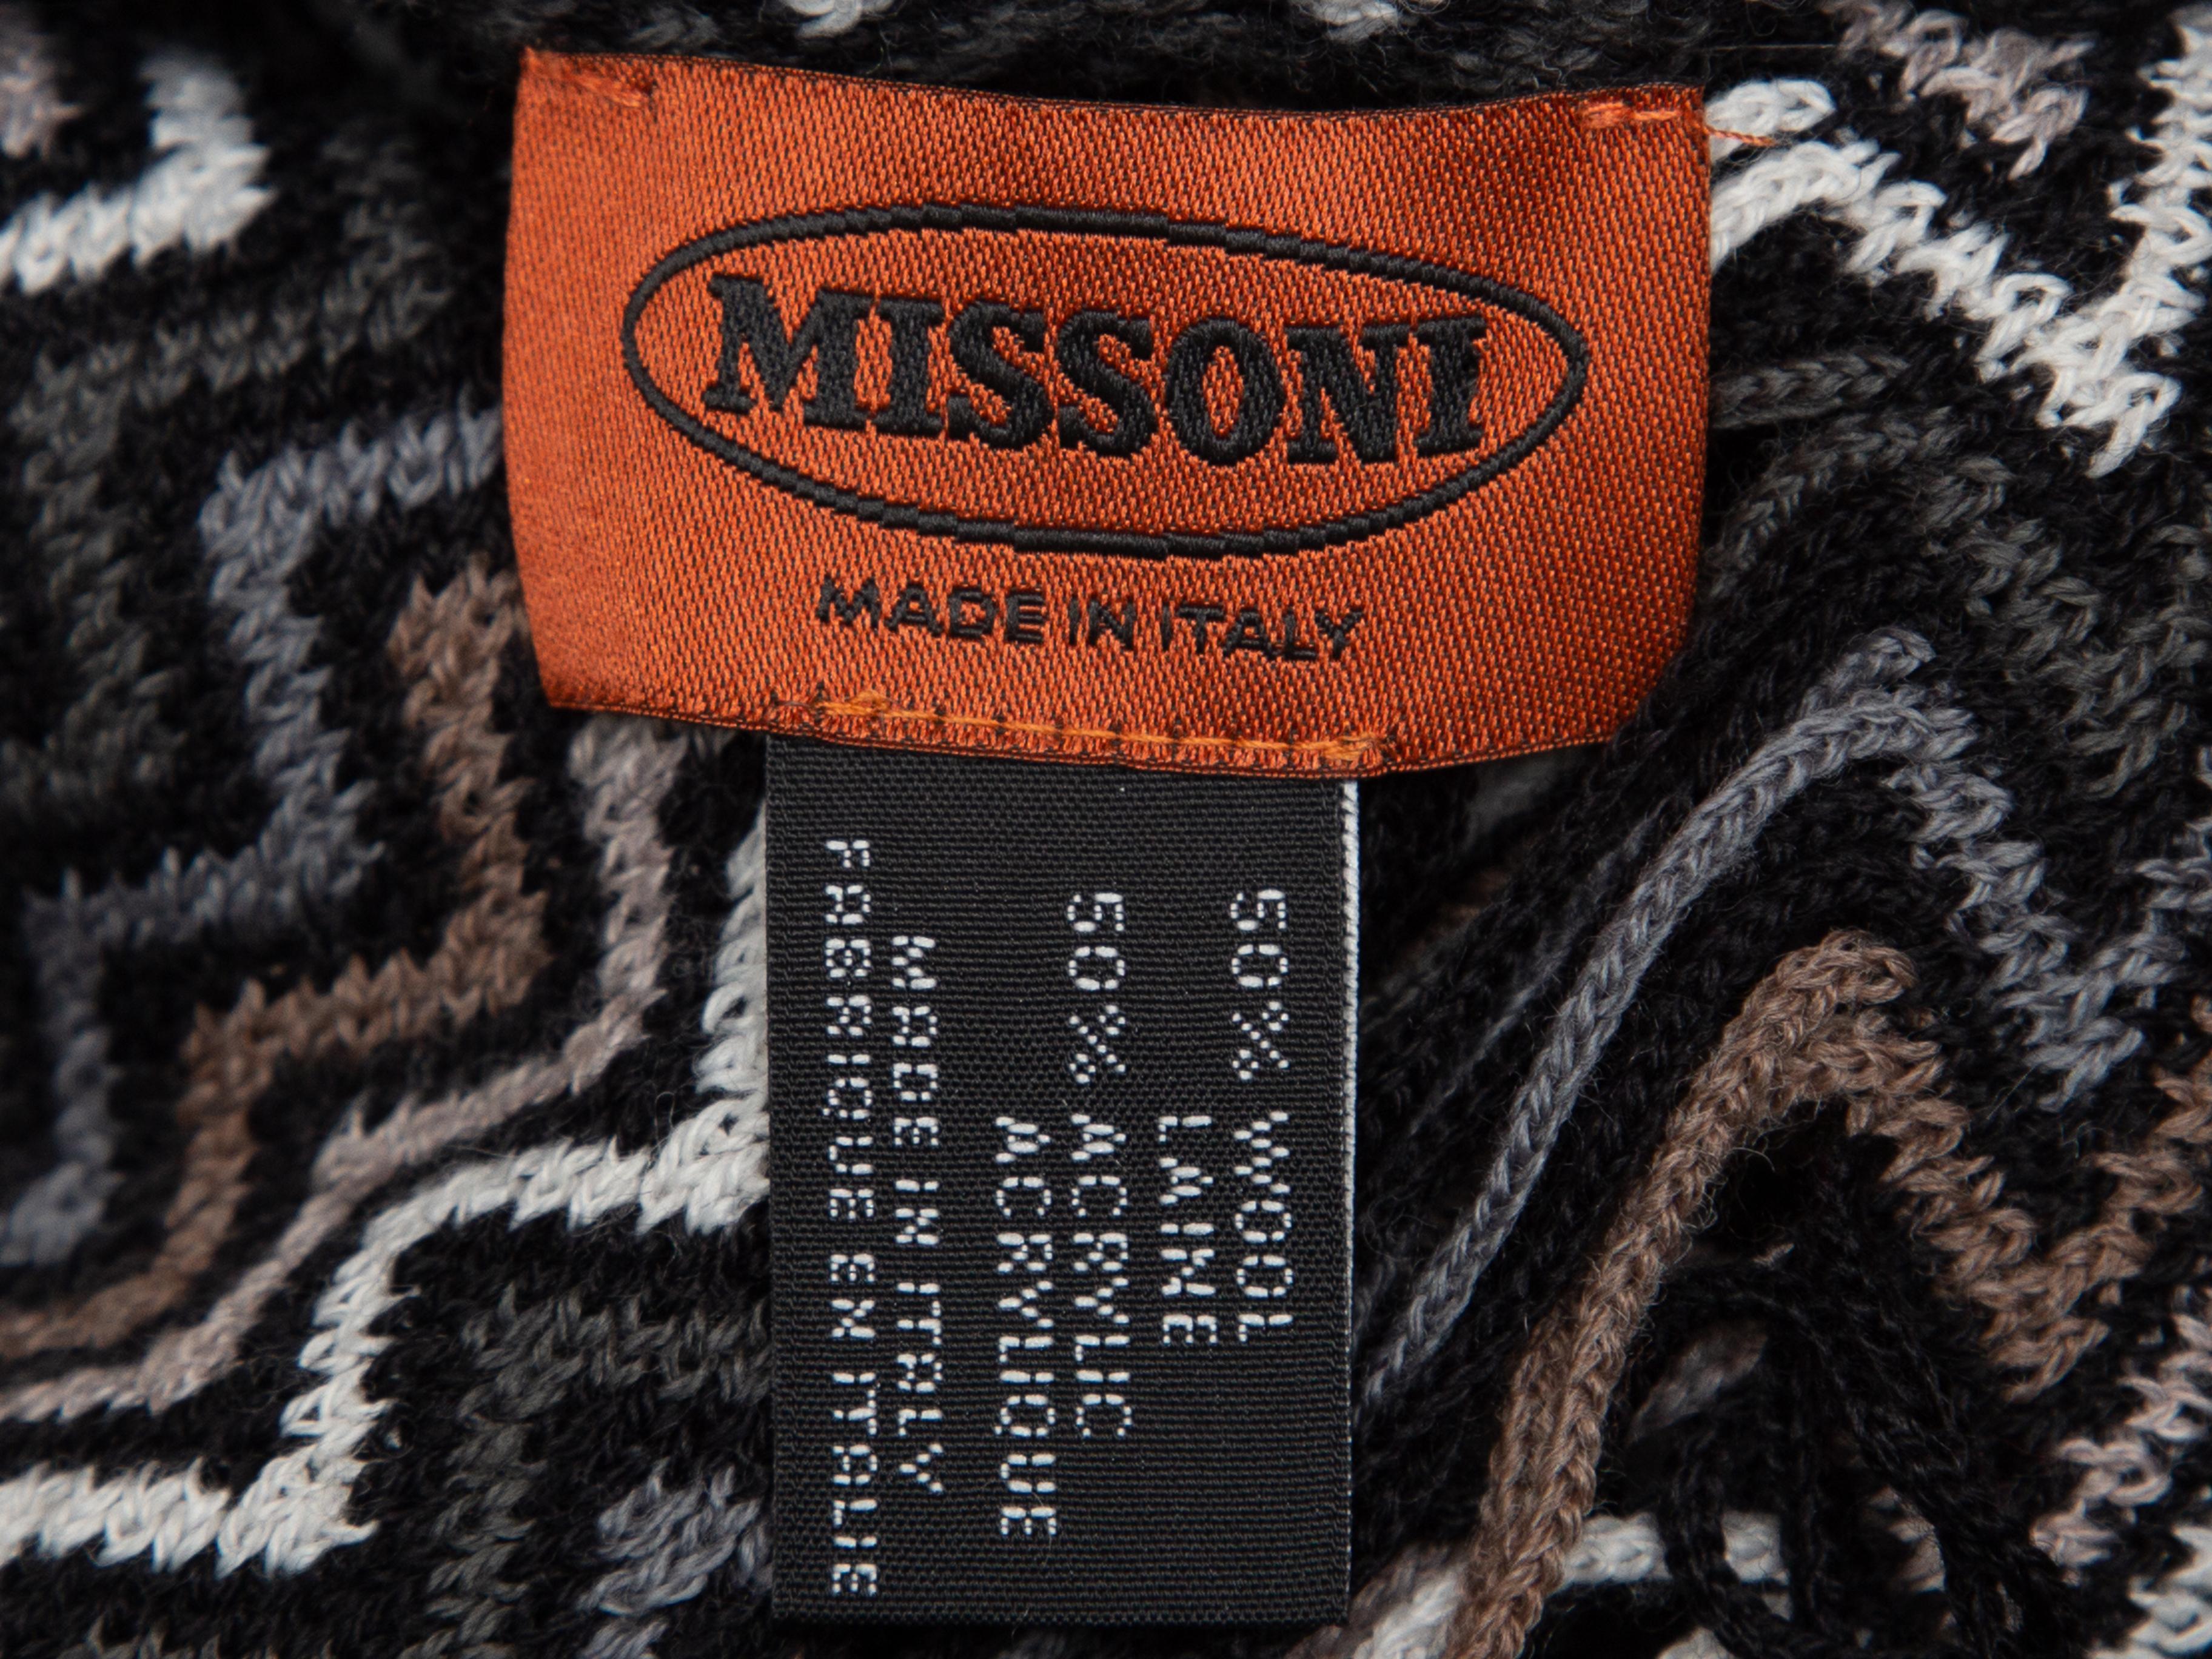 Product details: Black and multicolor wool-blend chevron scarf by Missoni. Fringe trim at ends. 19